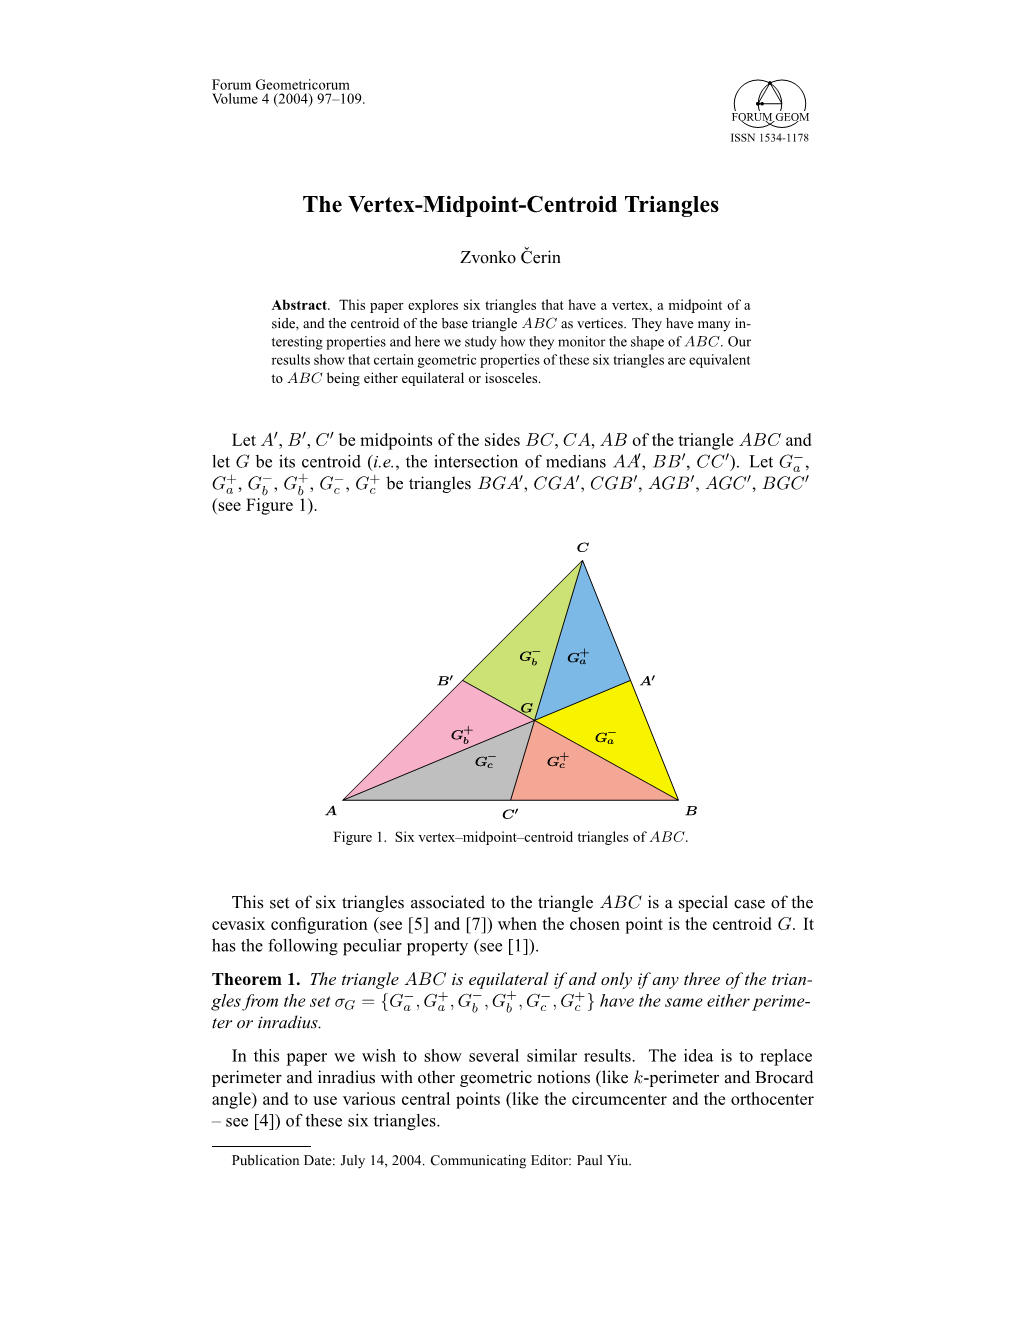 The Vertex-Midpoint-Centroid Triangles